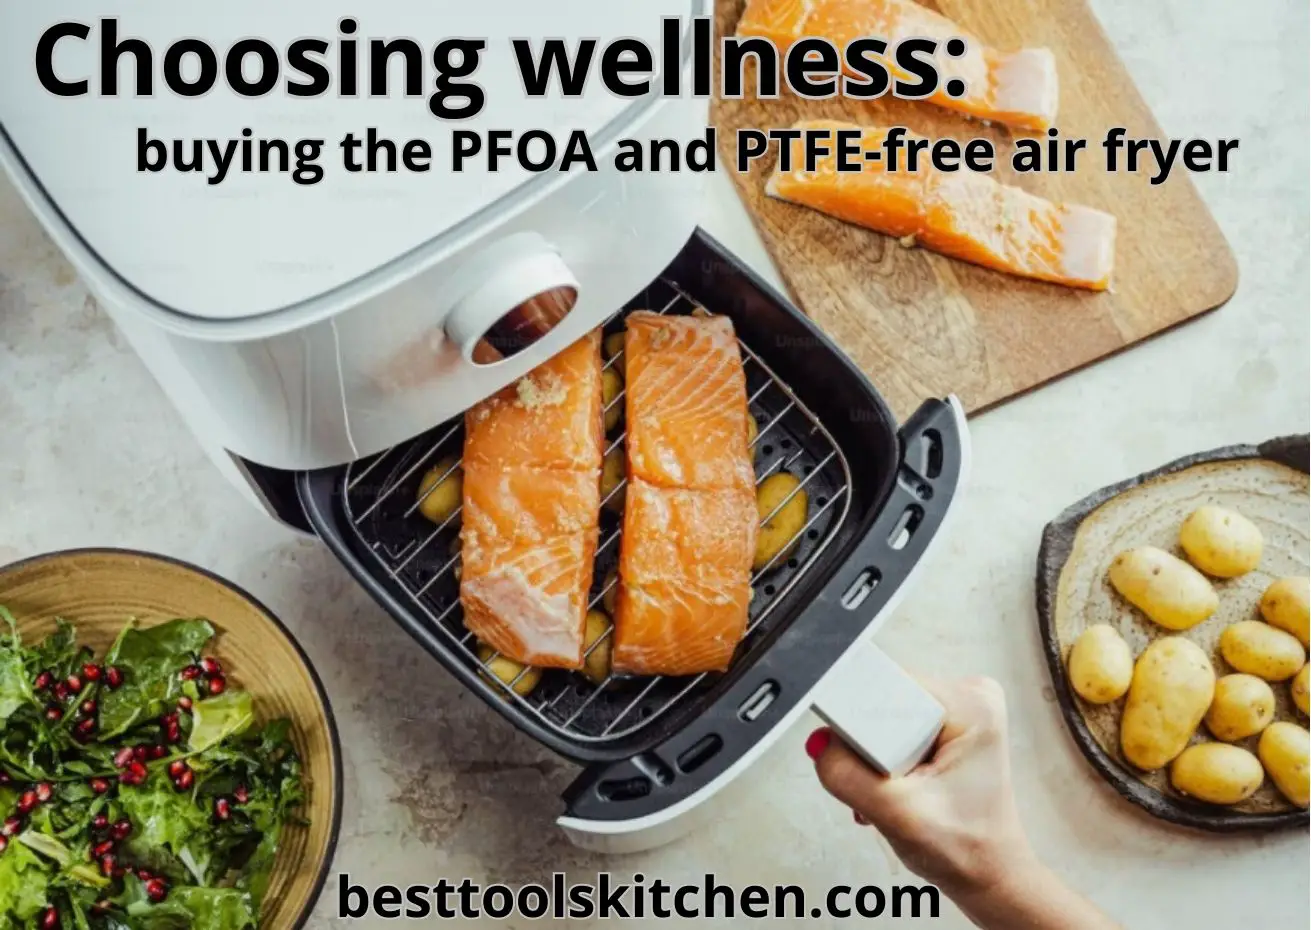 10 types of PFOA and PTFE-free air fryer: the best guide